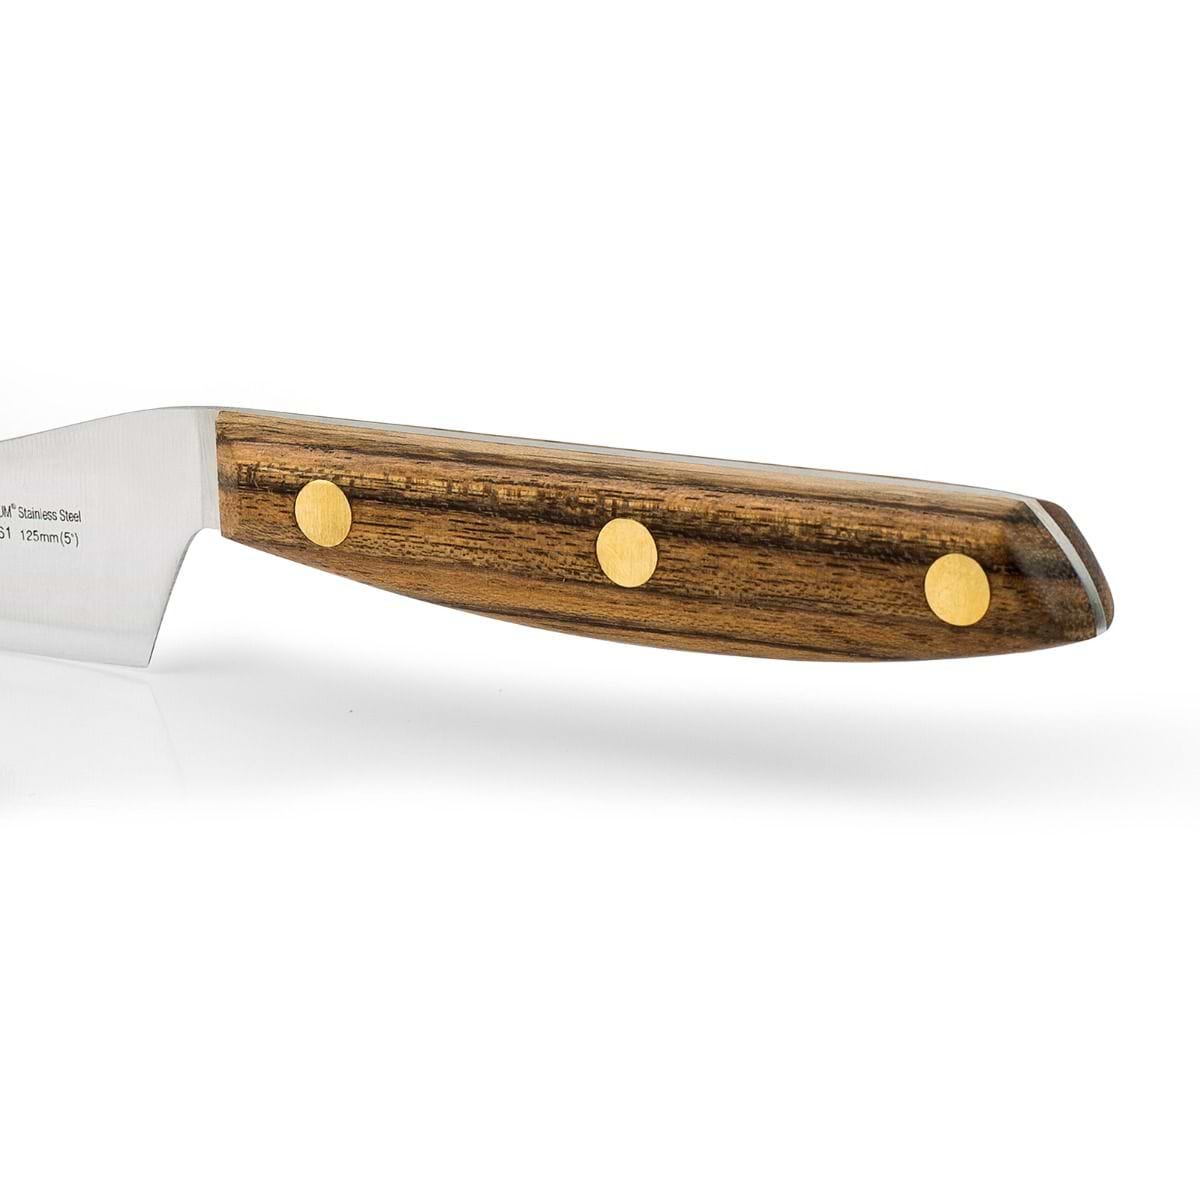 Video: Wooden eco-knife that is sharper than steel cuts through steak